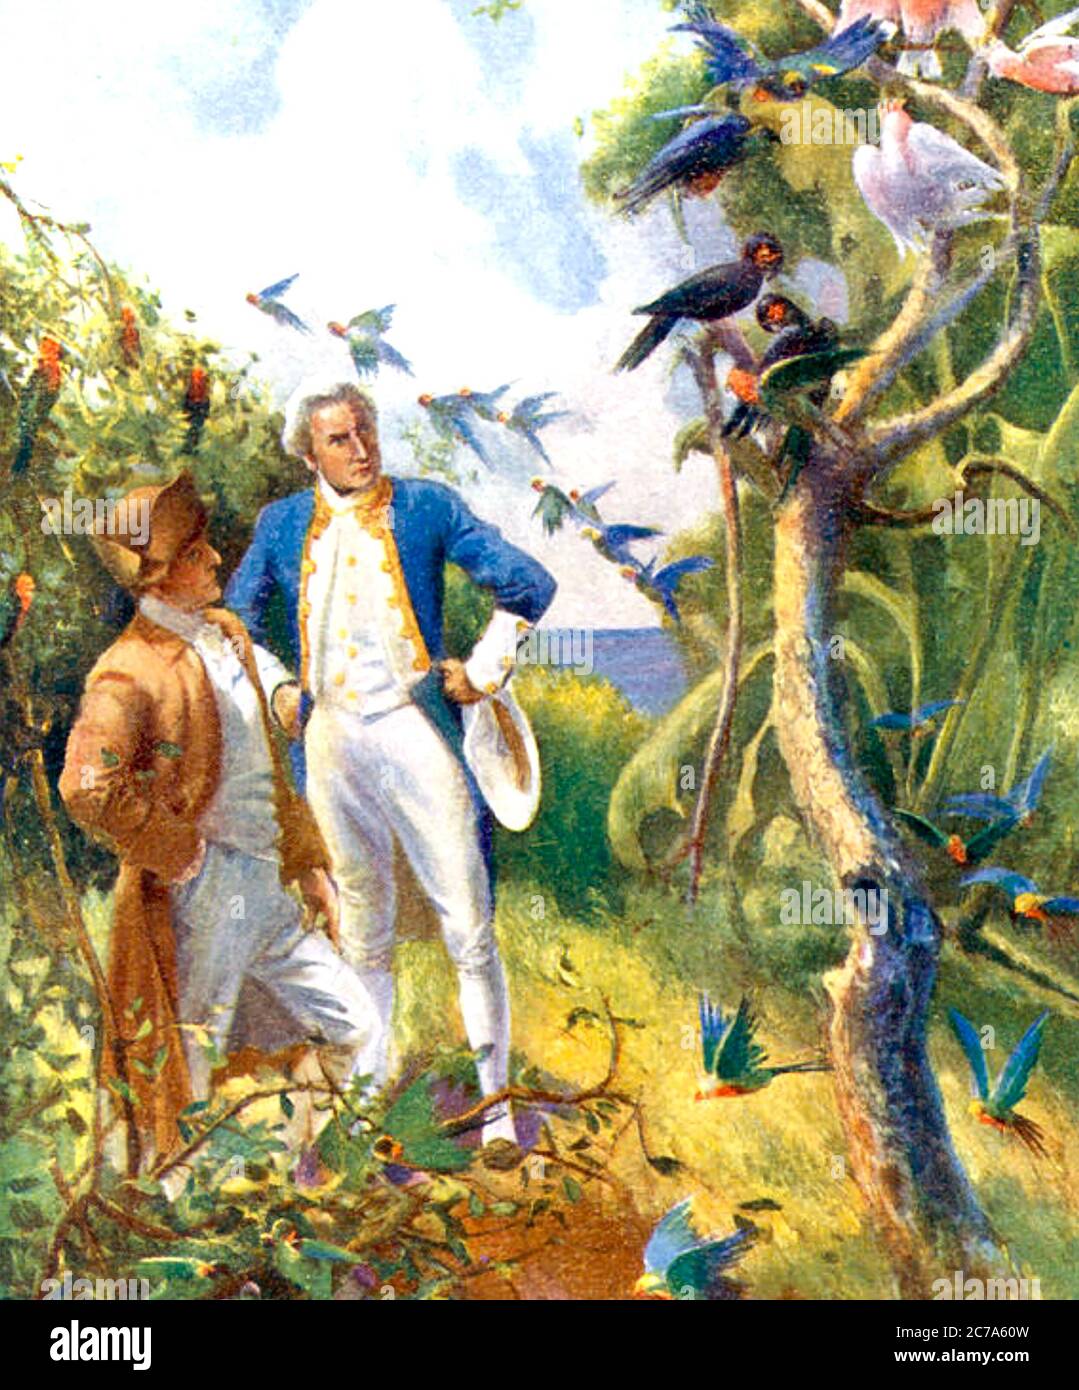 JOSEPH BANKS AND CAPTAIN JAMES COOK watching birdlife in Australia during the 1768-71 voyage by the Endeavour. A 1920s illustration. Stock Photo